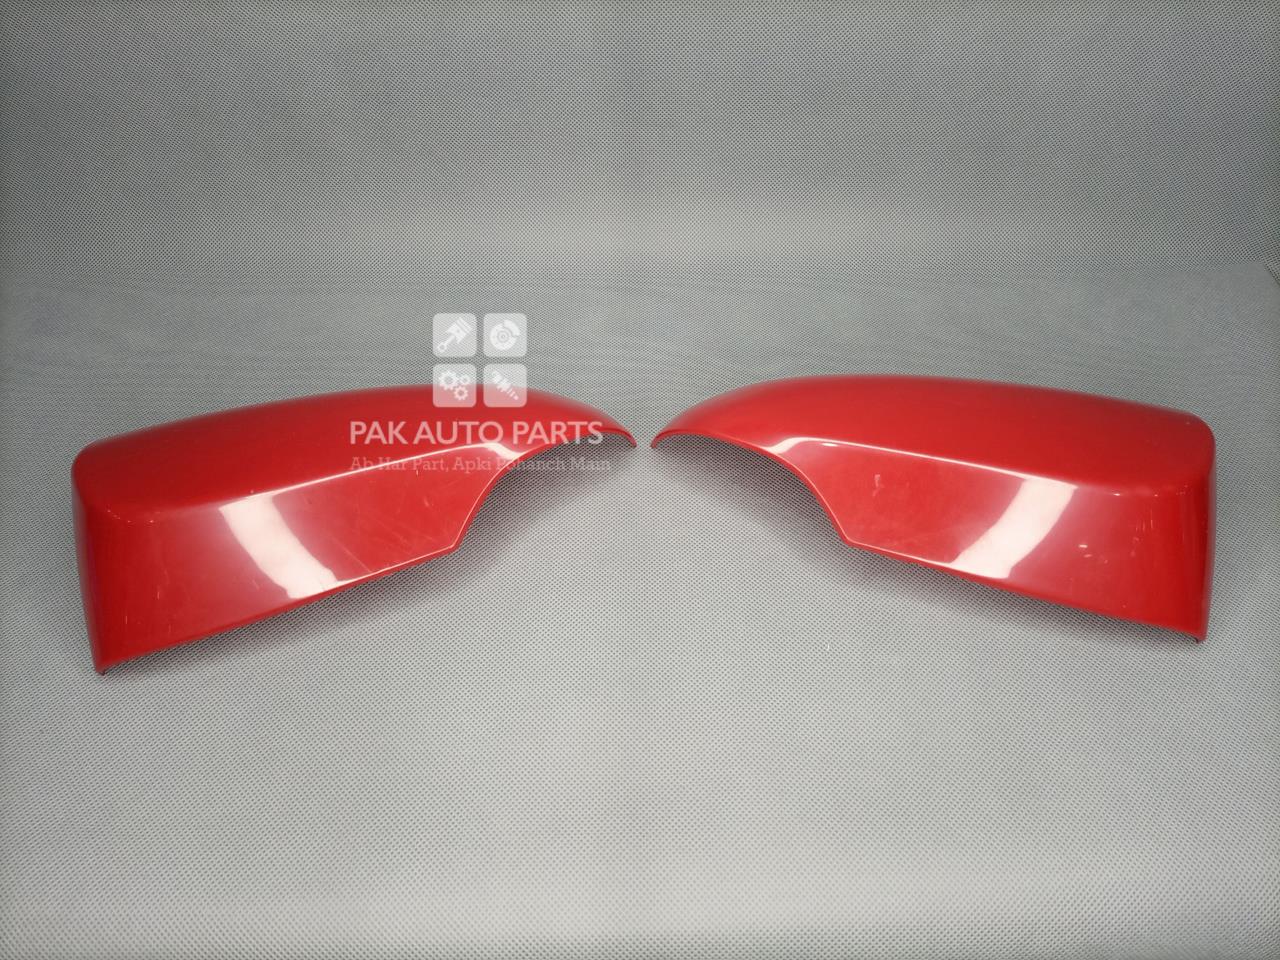 Picture of Toyota Aqua Side Mirror Cover Red (2pcs)